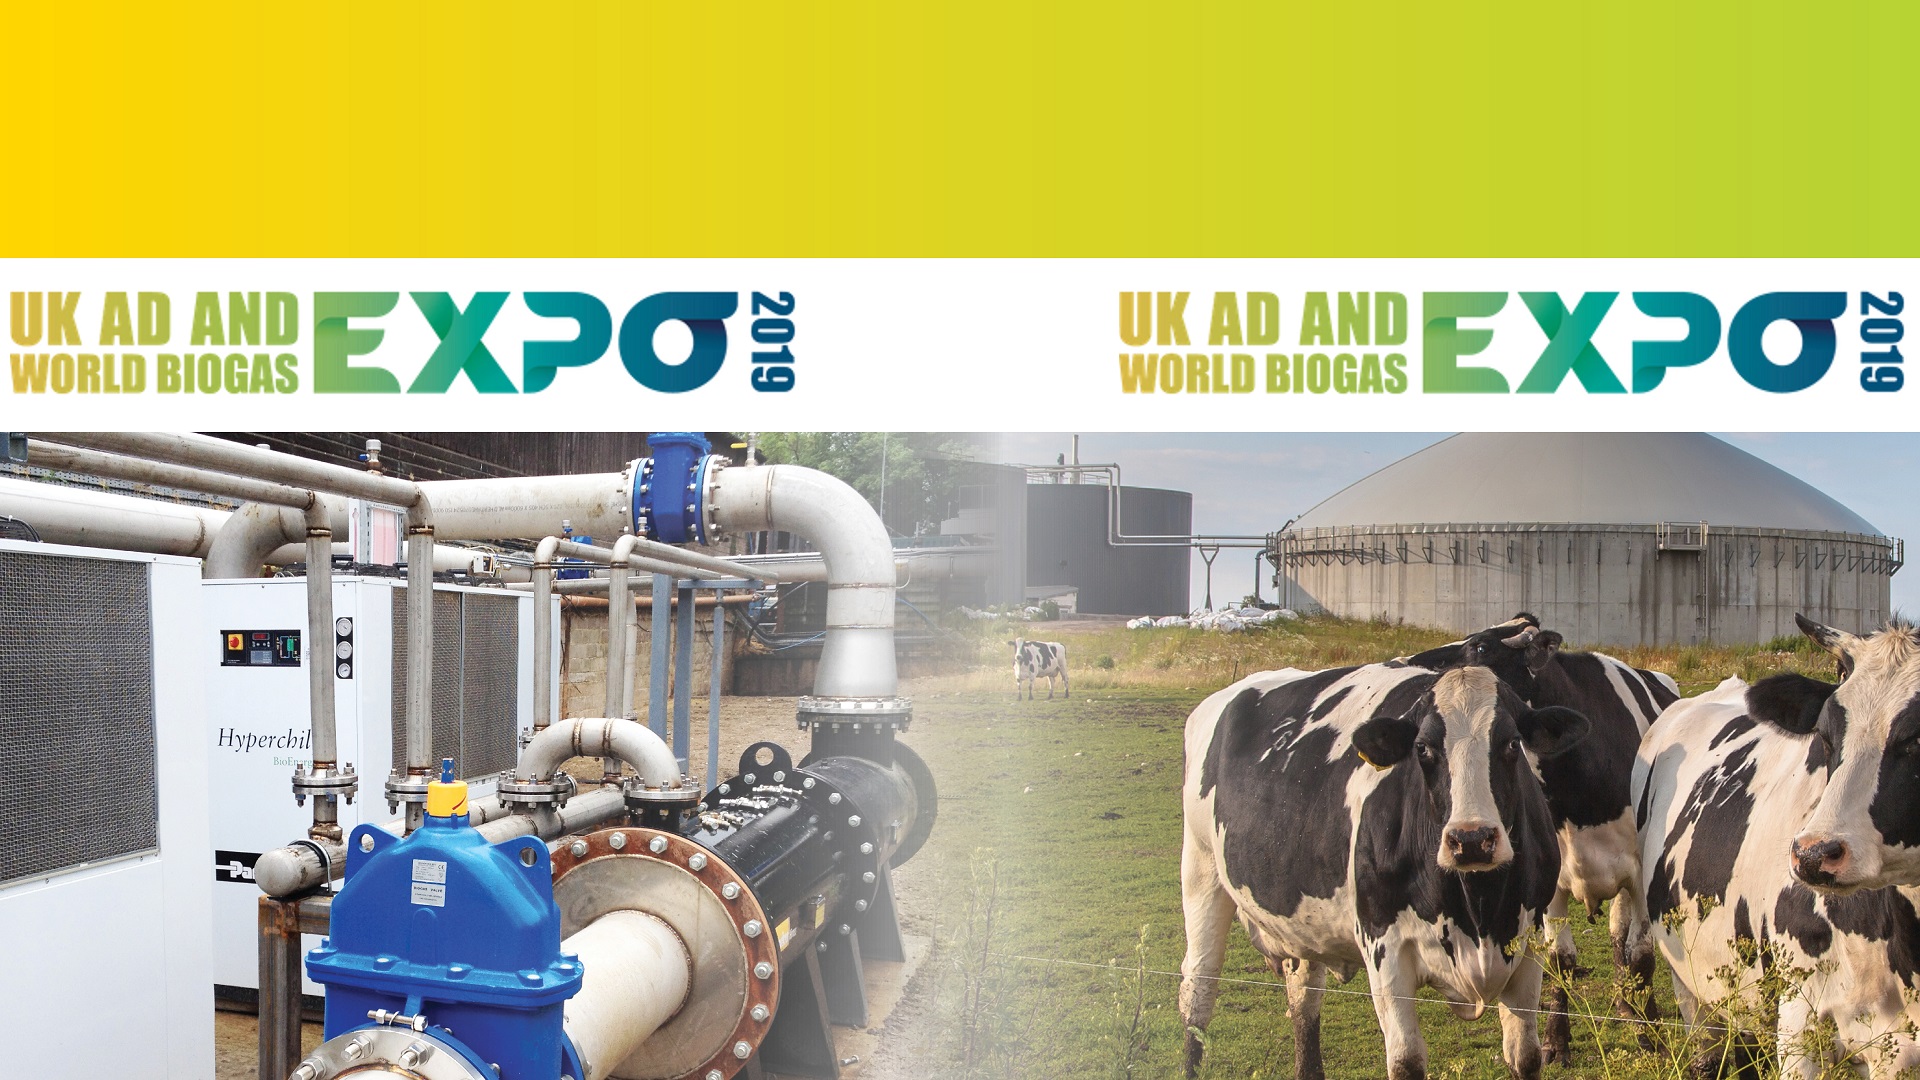 AD and Biogas AVK exhibiting